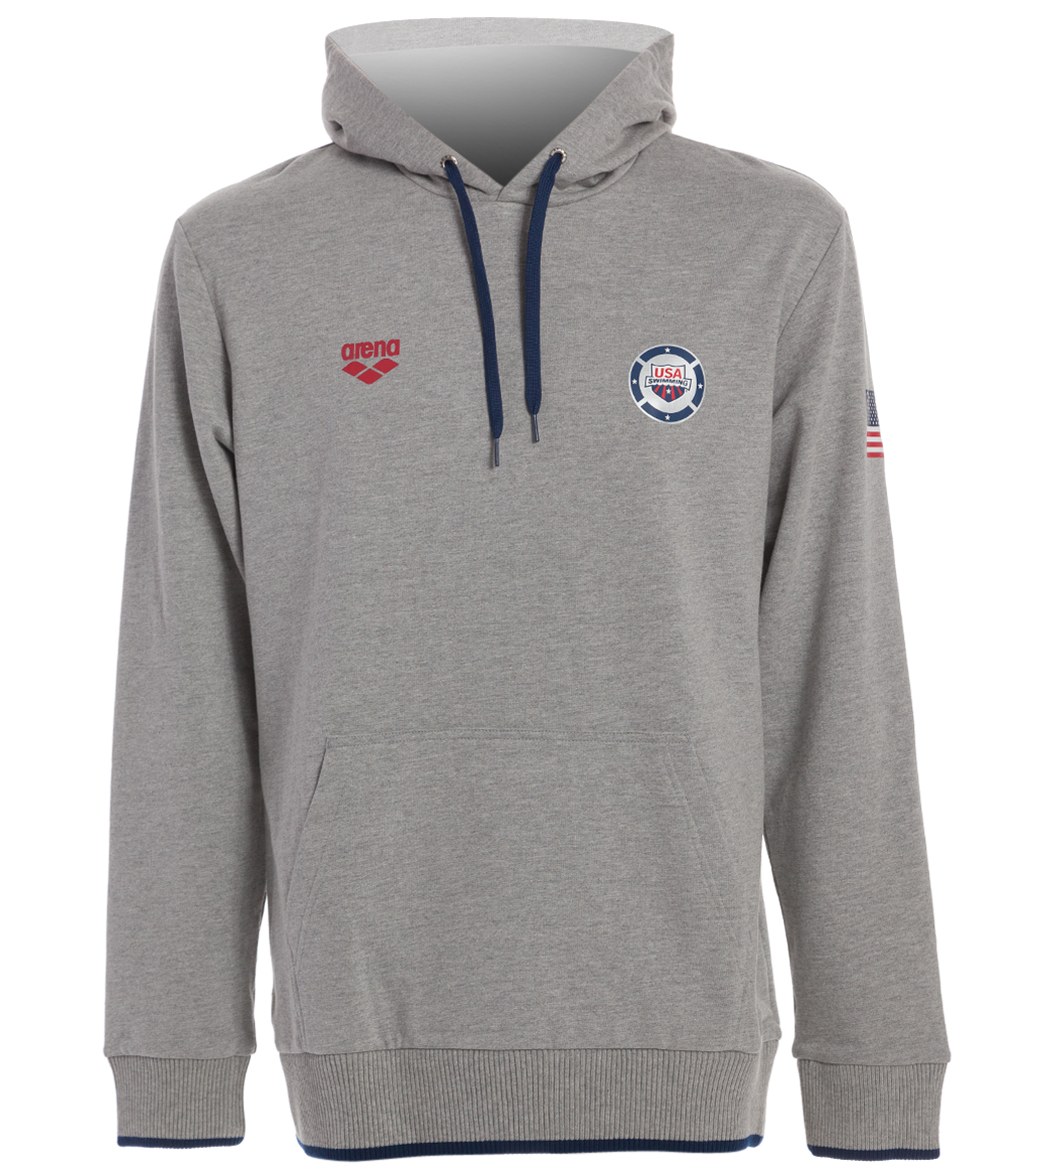 Arena USA Swimming Hooded Sweatshirt at SwimOutlet.com - Free Shipping